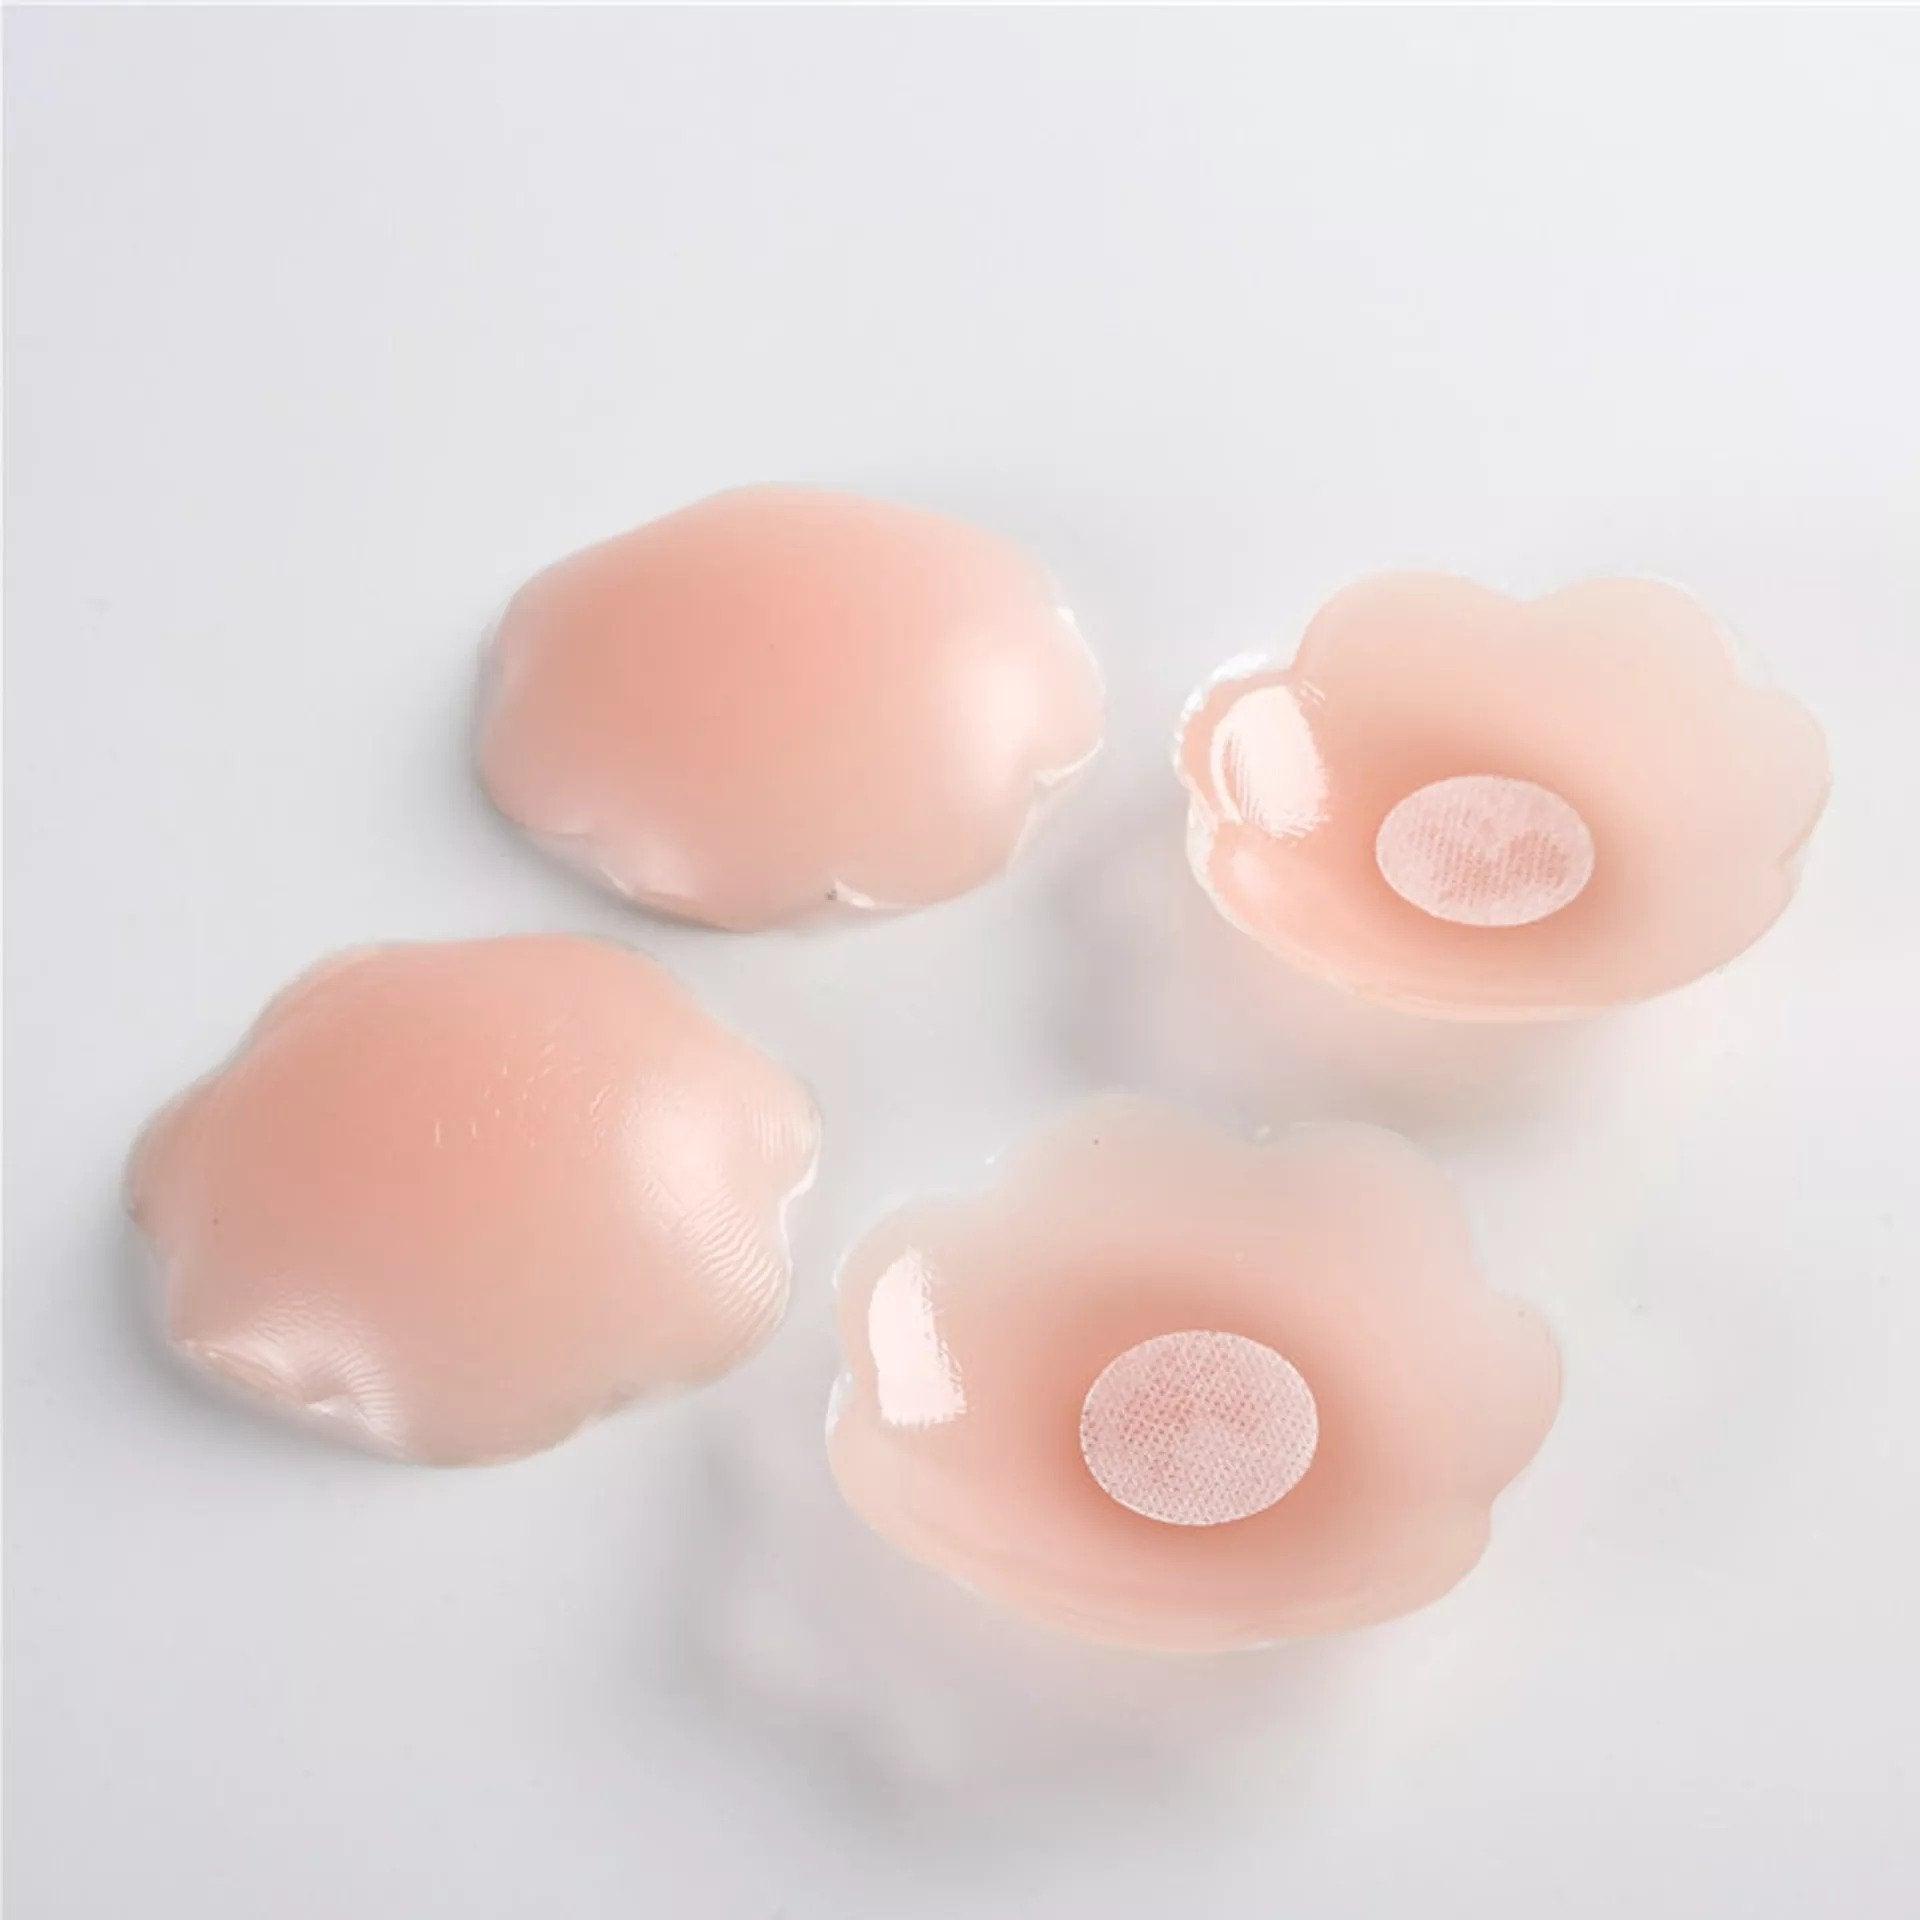 JUMISEE 4 Pairs Reusable Adhesive Nipple Cover,Shiny Sequin Silicone  Heart-Shaped Breast Pads Pasties Bra with Tassel